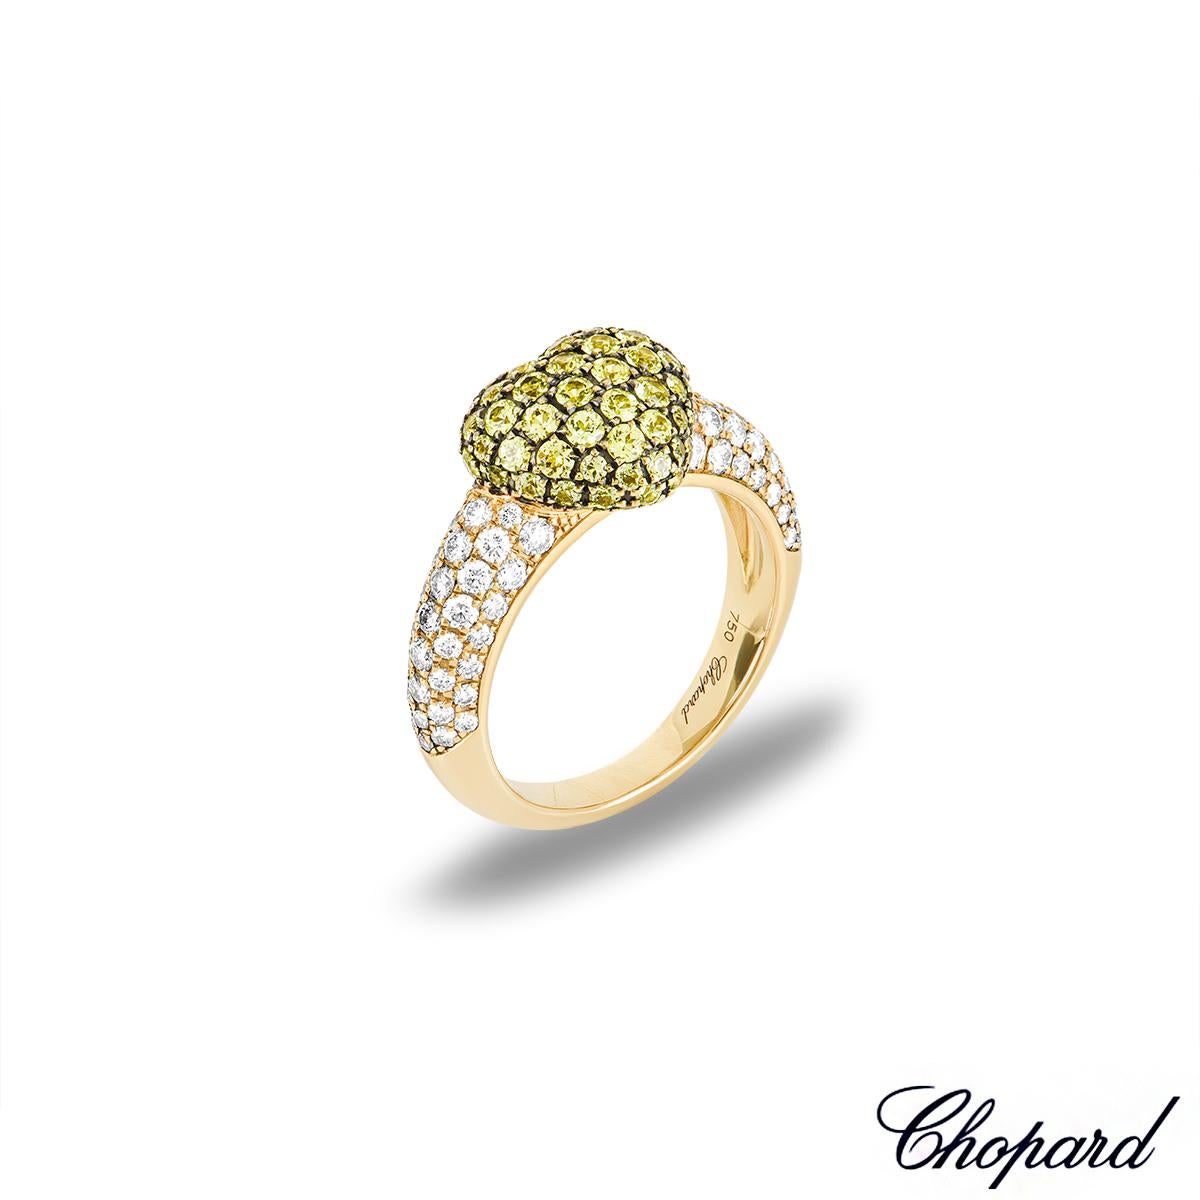 A charming 18k yellow gold diamond and yellow sapphire ring by Chopard. The ring features a heart shaped motif pave set with 71 round cut yellow sapphires. Accentuating the central heart motif are 74 round brilliant cut diamonds pave set to the